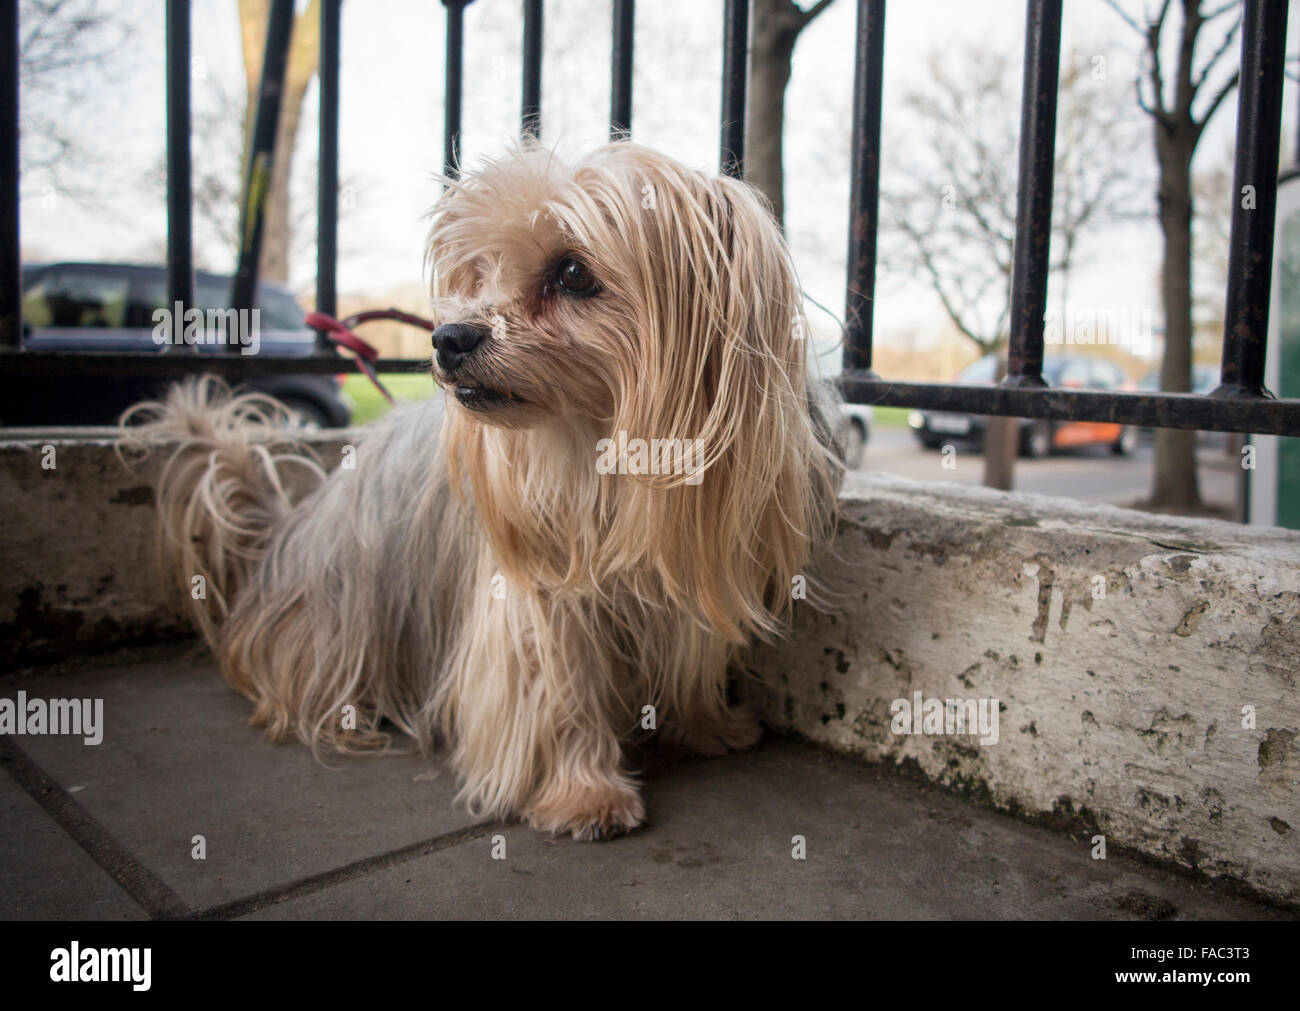 A Yorkshire terrier awaits it's owner Stock Photo